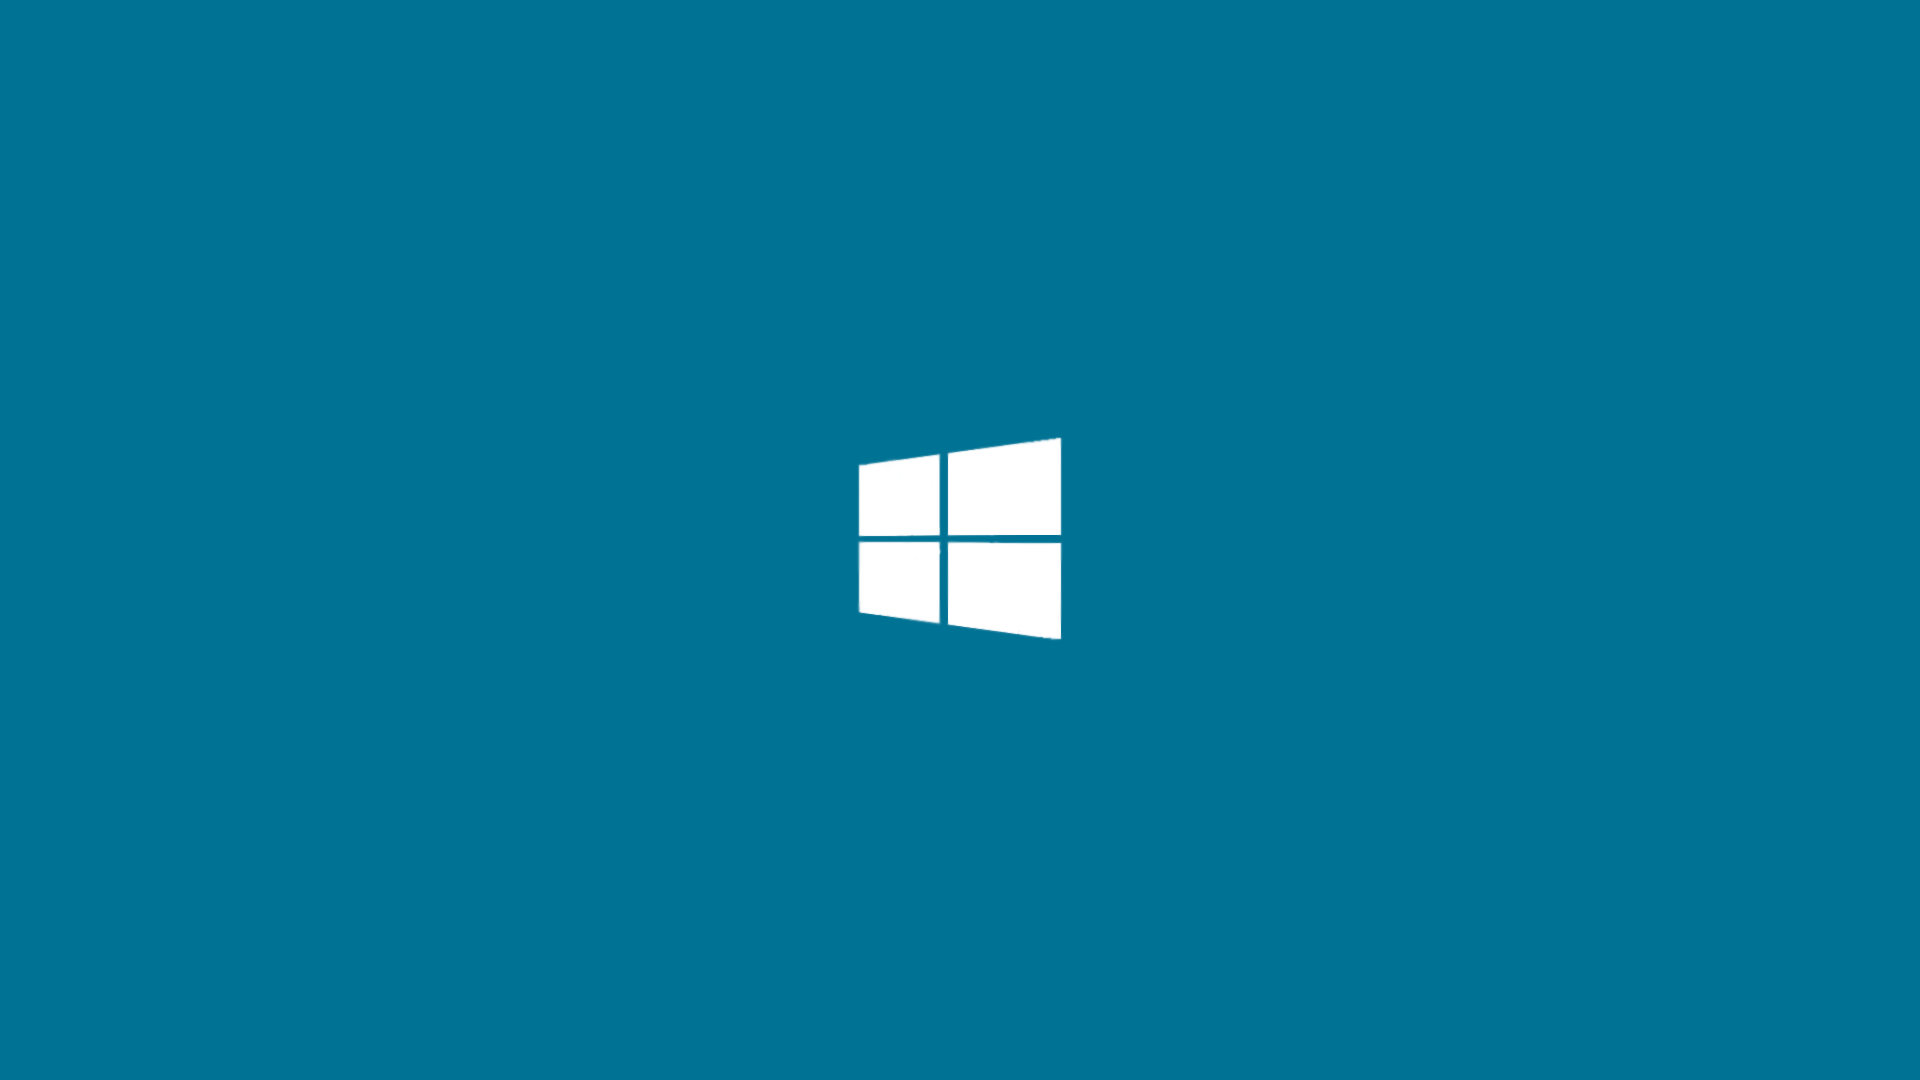 Windows Logo Wallpapers - Wallpaper Cave Full Hd Wallpapers For Windows 8 1920x1080